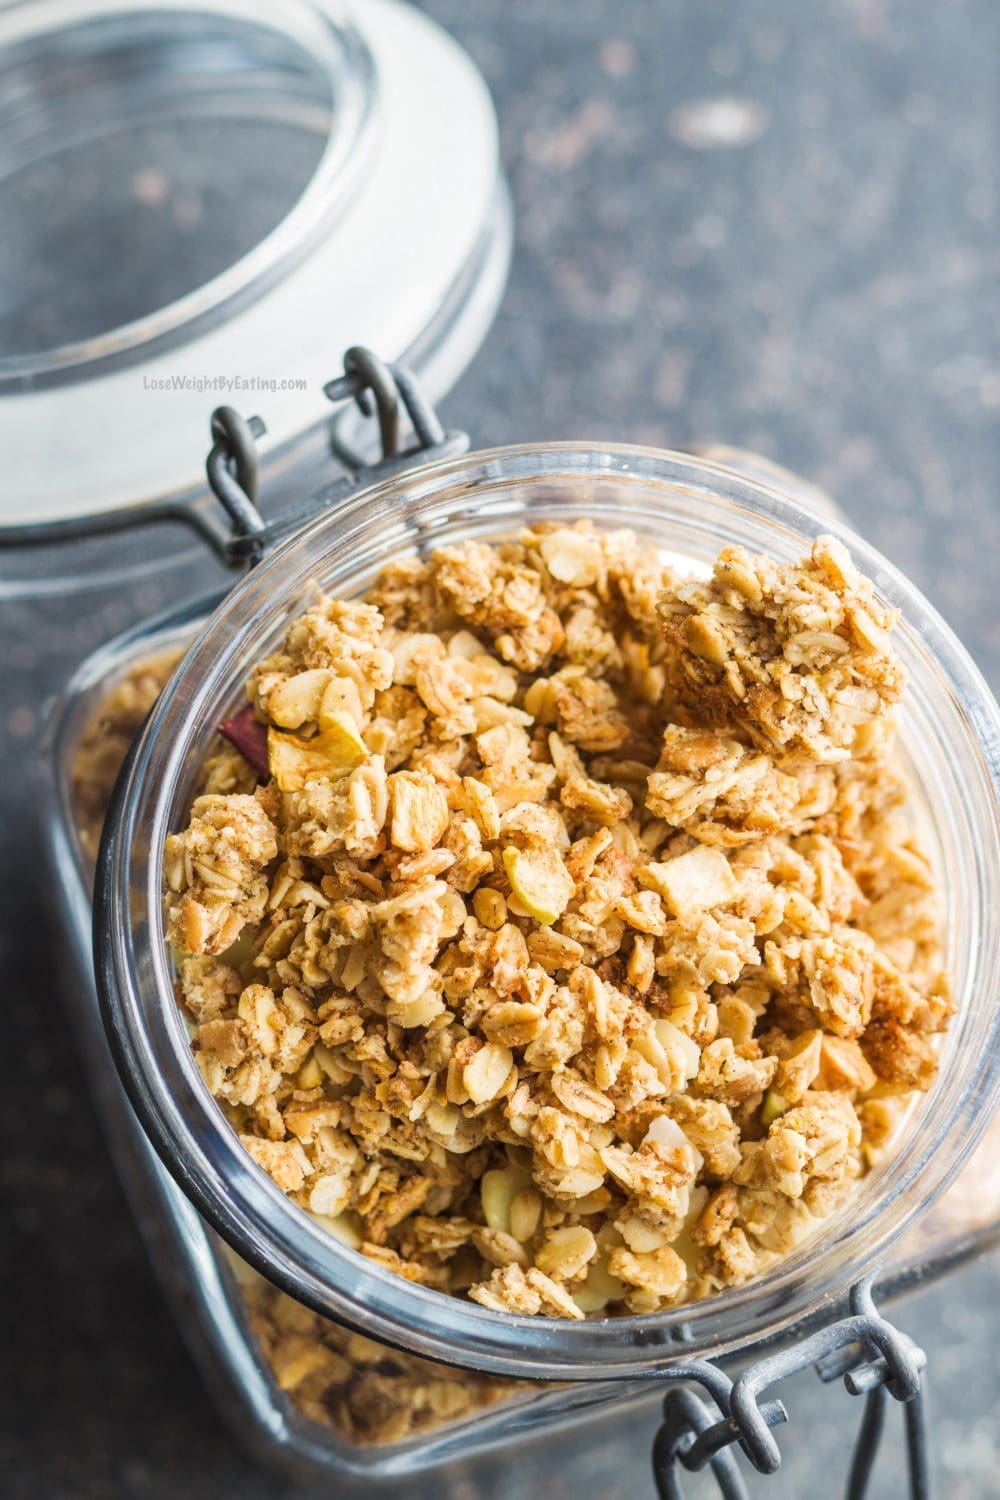 Healthy Homemade Granola Recipe Weight Loss Meal Prep Breakfasts 